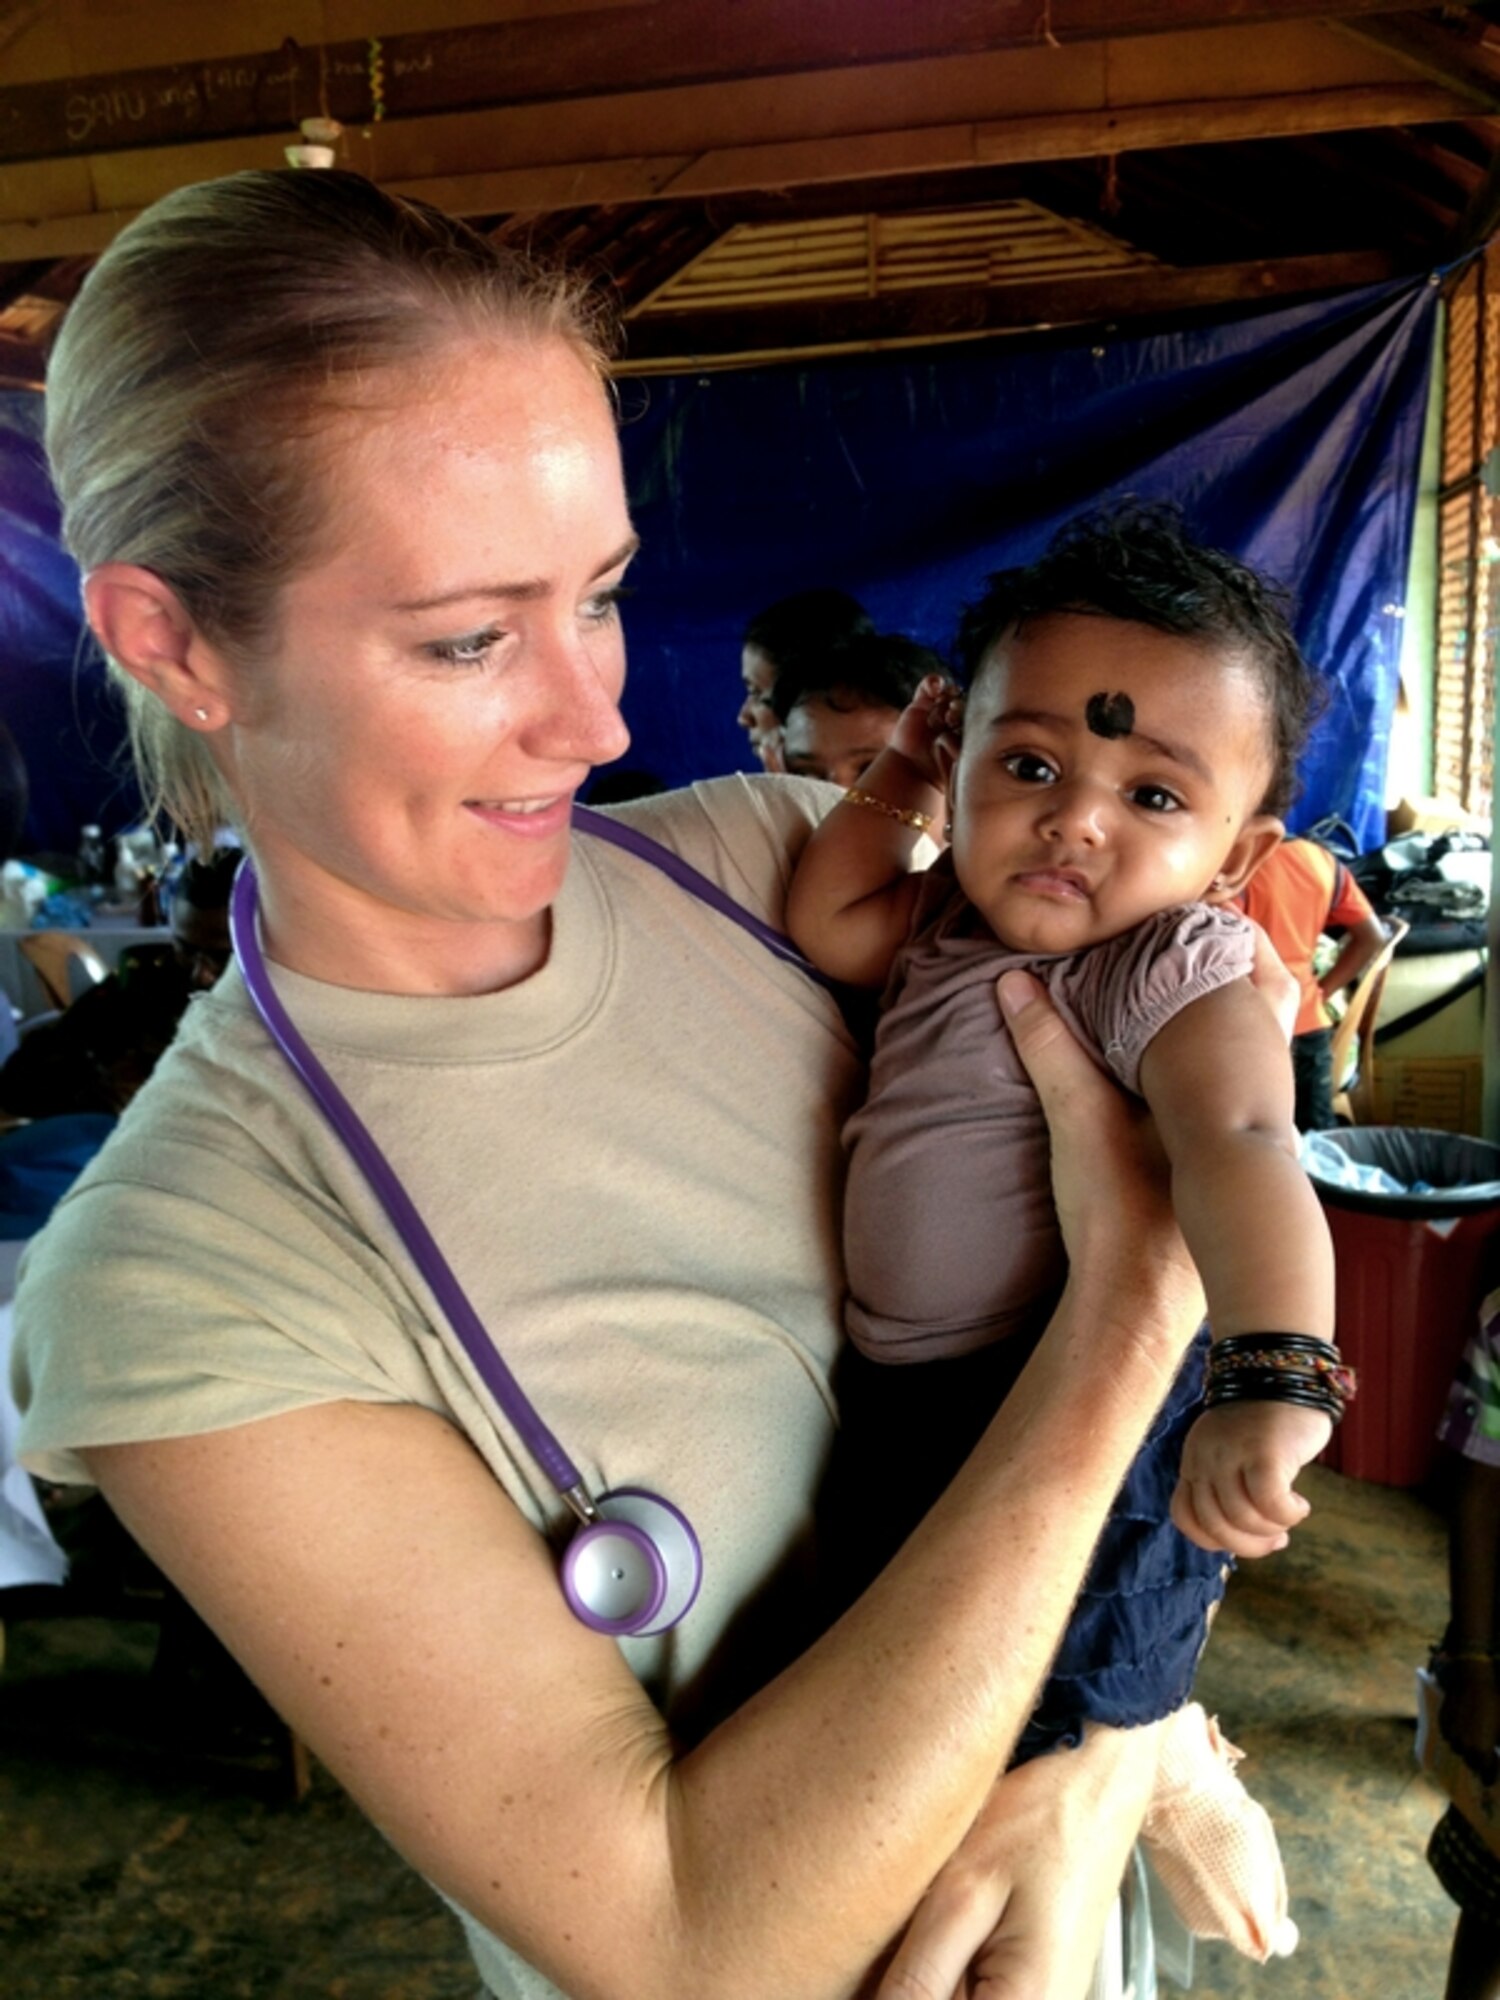 In this file photo, Air Force Tech. Sgt. Misty Ray of the Oregon National Guard holds a child to be examined during the Pacific Angel mission in Sri Lanka in 2013. Eight Nevada Guard Airmen are participating in this year’s Pacific Angel mission in Tonga through July 26.

File photo courtesy Oregon National Guard
